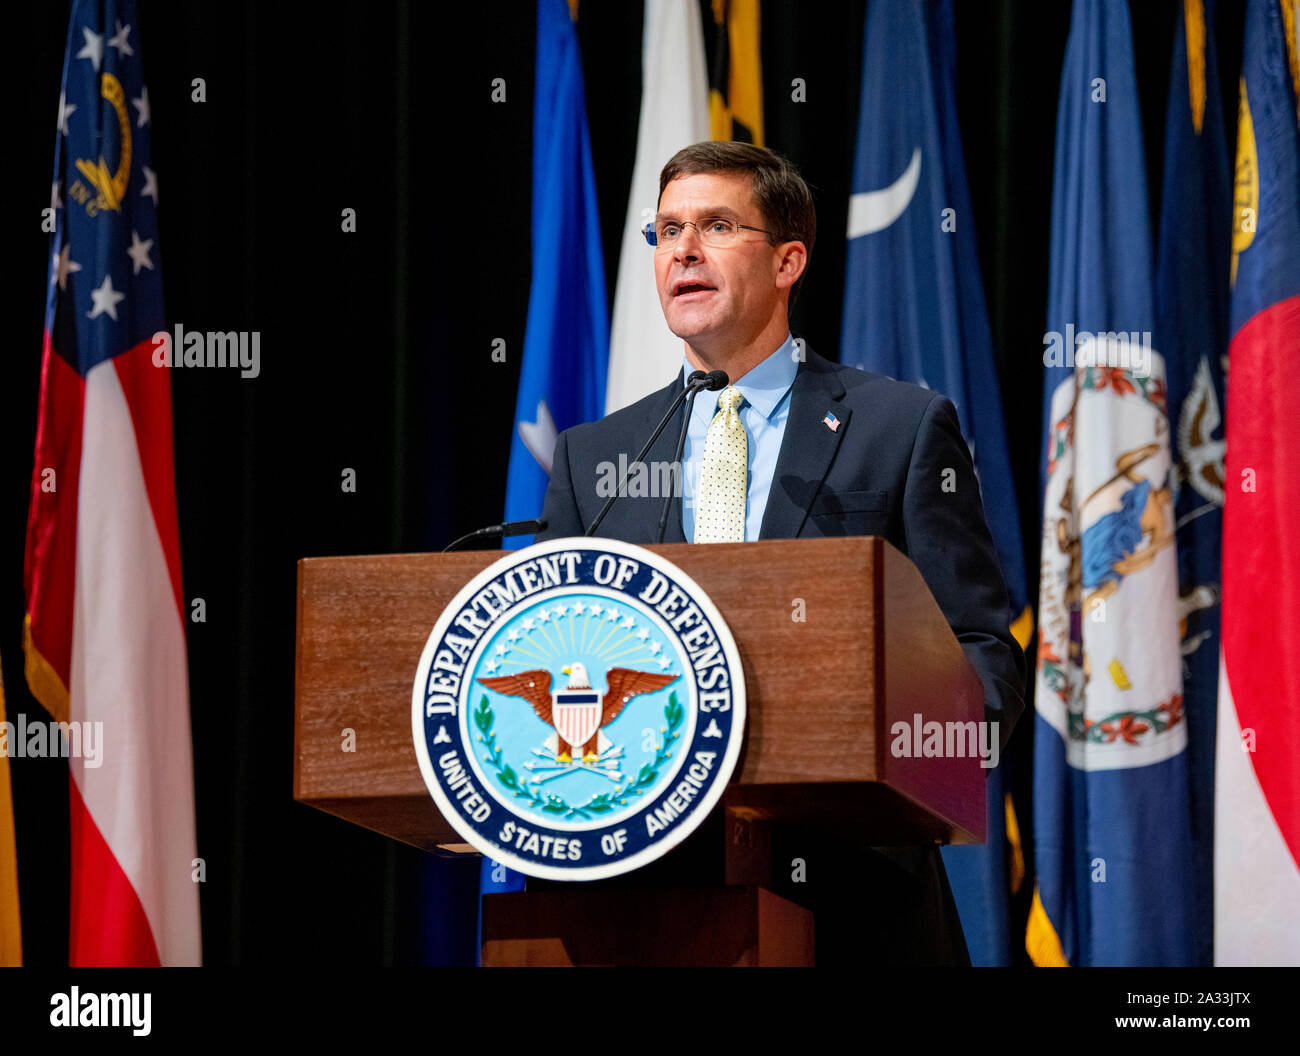 Defense Secretary, Mark Esper and other Keynote speakers honor the recipients of the Department of Defense 39th annual Disability Awards at the Pentagon, Washington, D.C., Oct. 3, 2019. The awards are presented to Service members and civilians with disabilities for their outstanding contributions that support the DOD mission. (DoD photo by Marine Corps Sgt. Dylan C. Overbay) Stock Photo